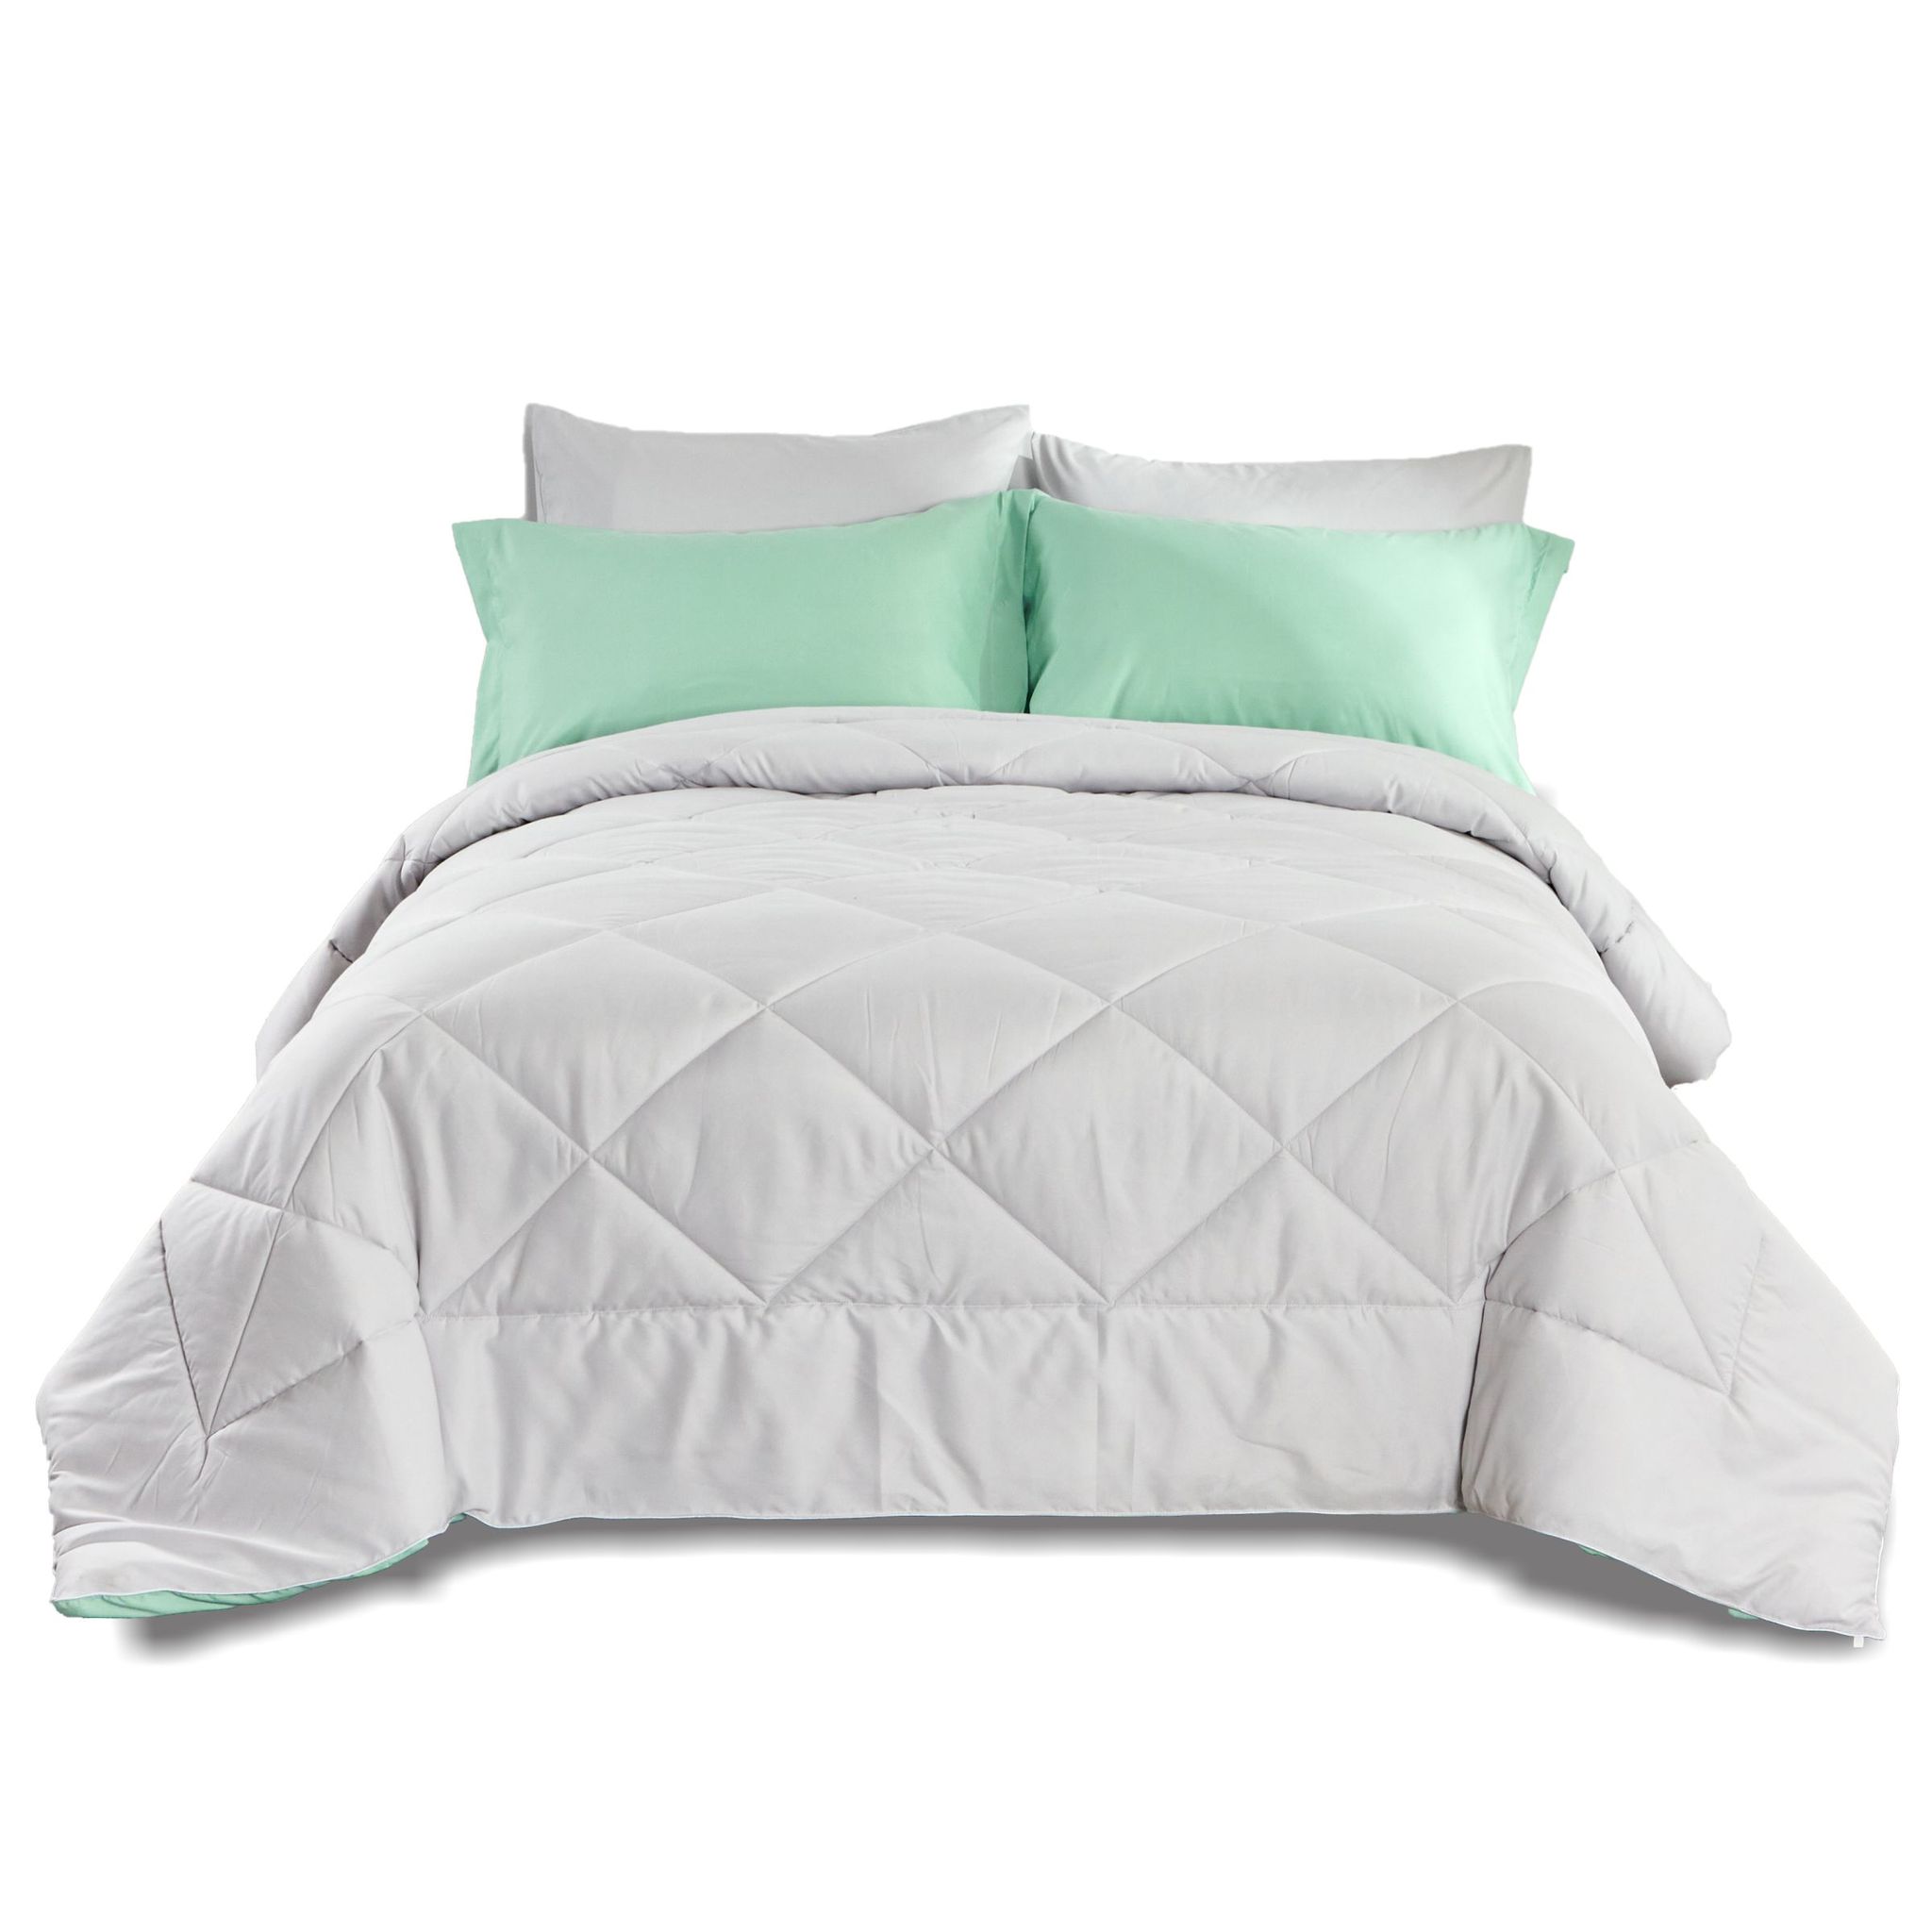 Diamond Quilted Reversible Comforter Set 6-Piece King Spa Mint/Light Gray